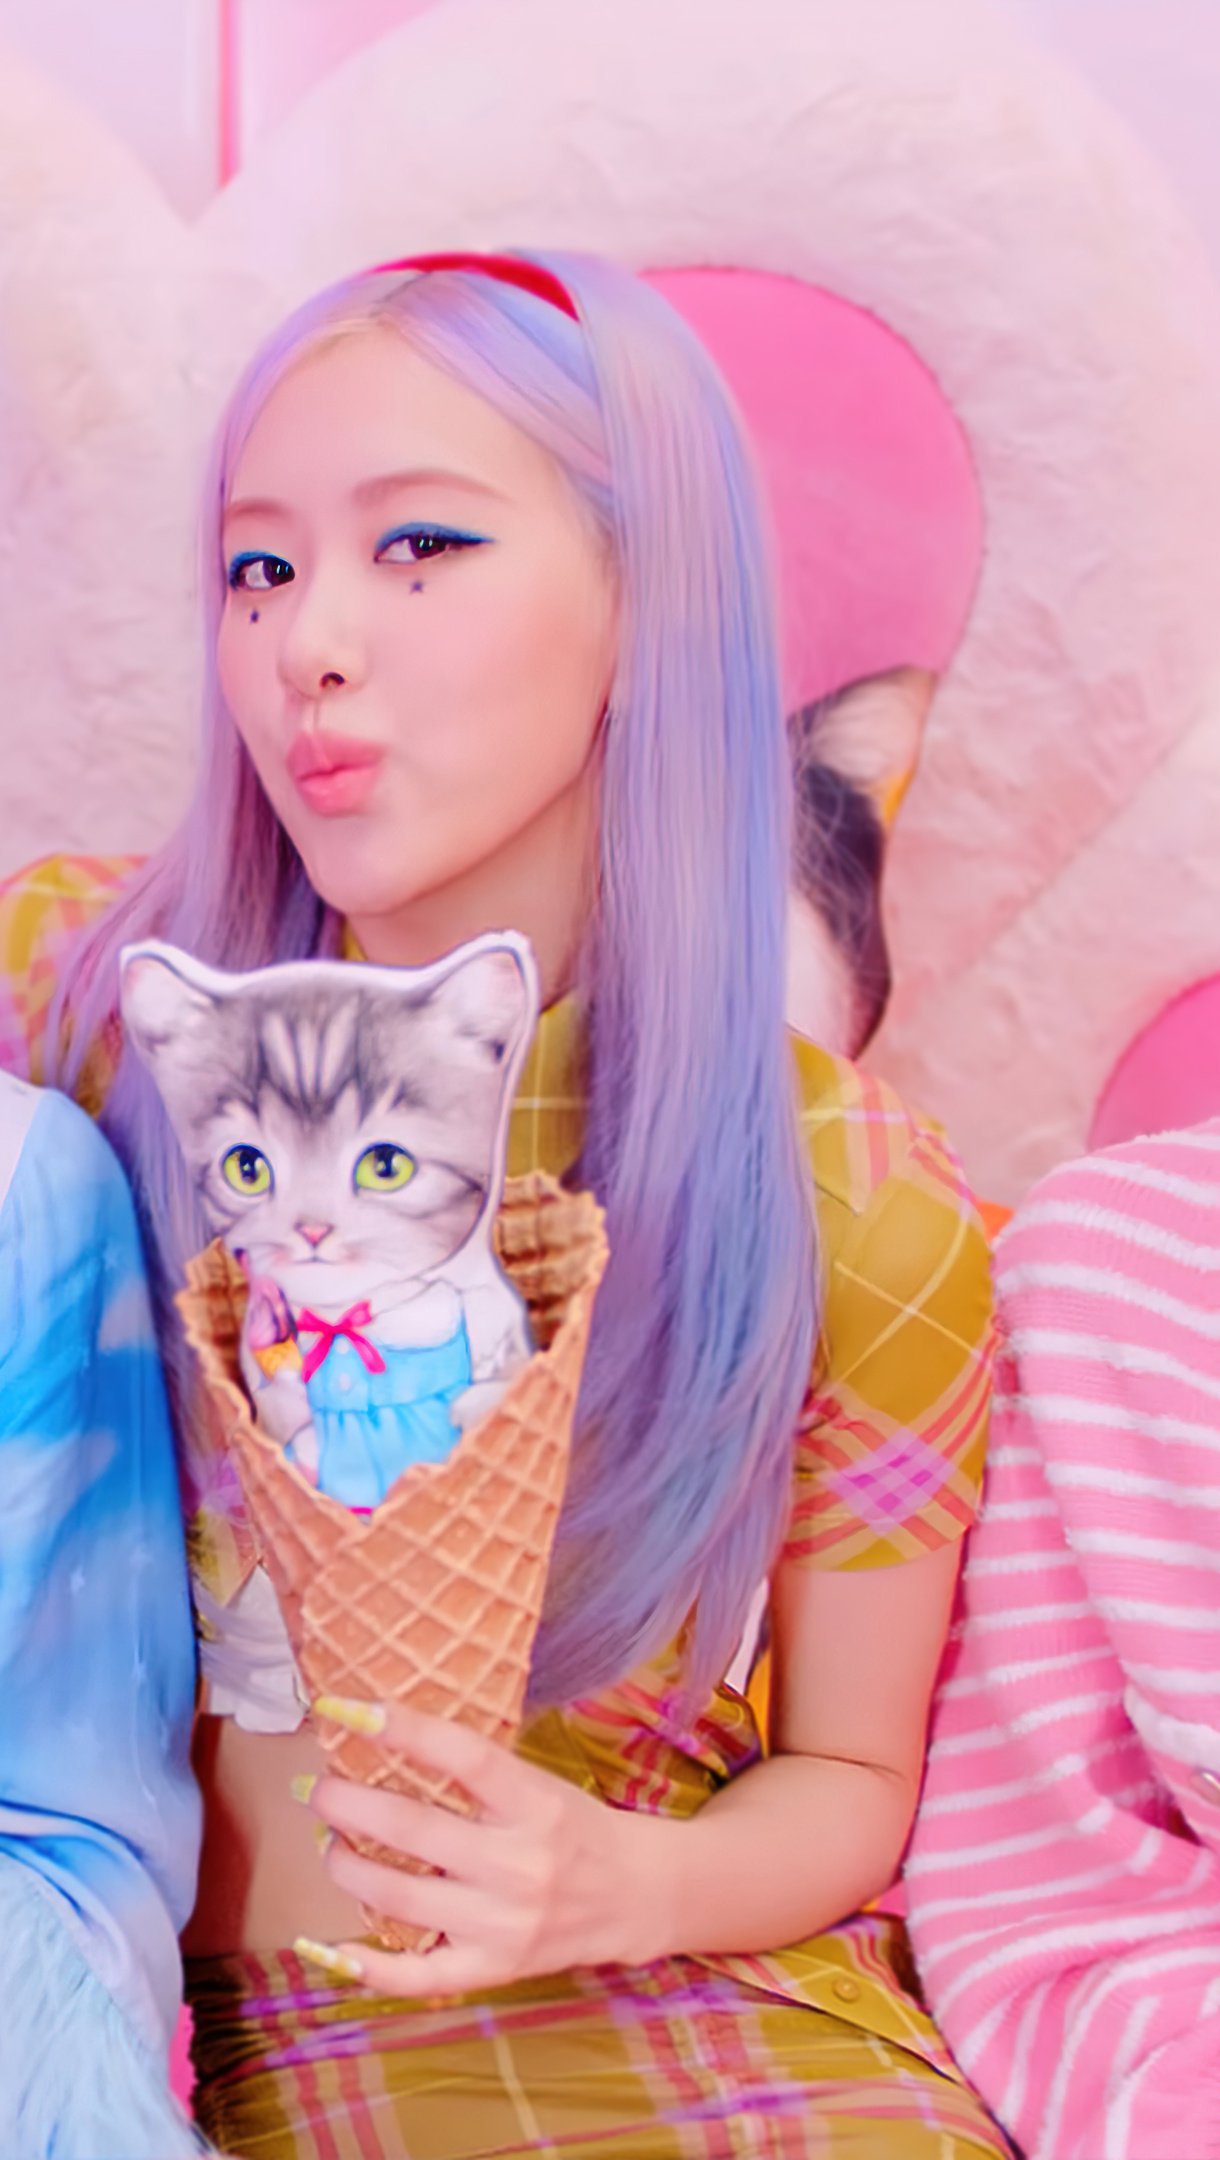 Wallpaper Girls from Blackpink with kittens in cones Vertical